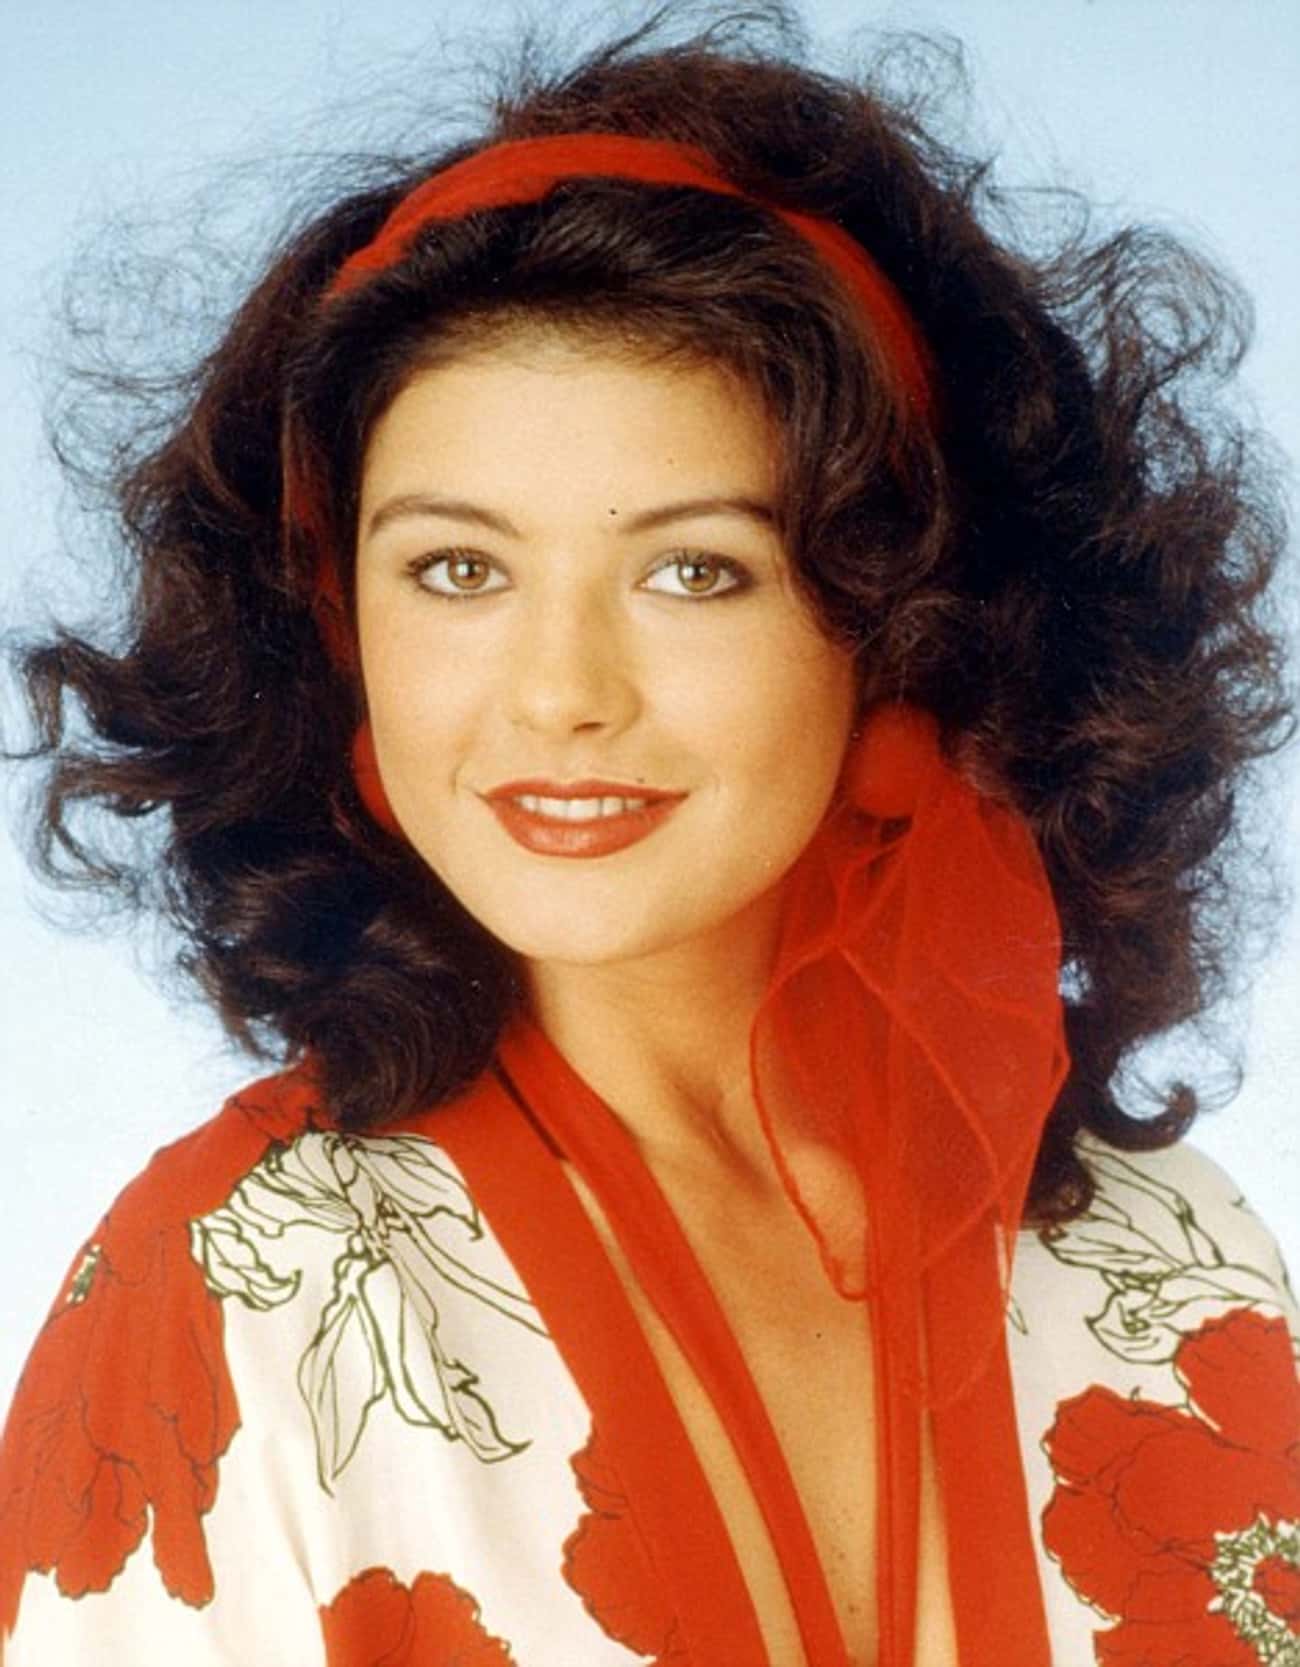 Young Catherine Zeta-Jones in Orange and White Patterned Blouse